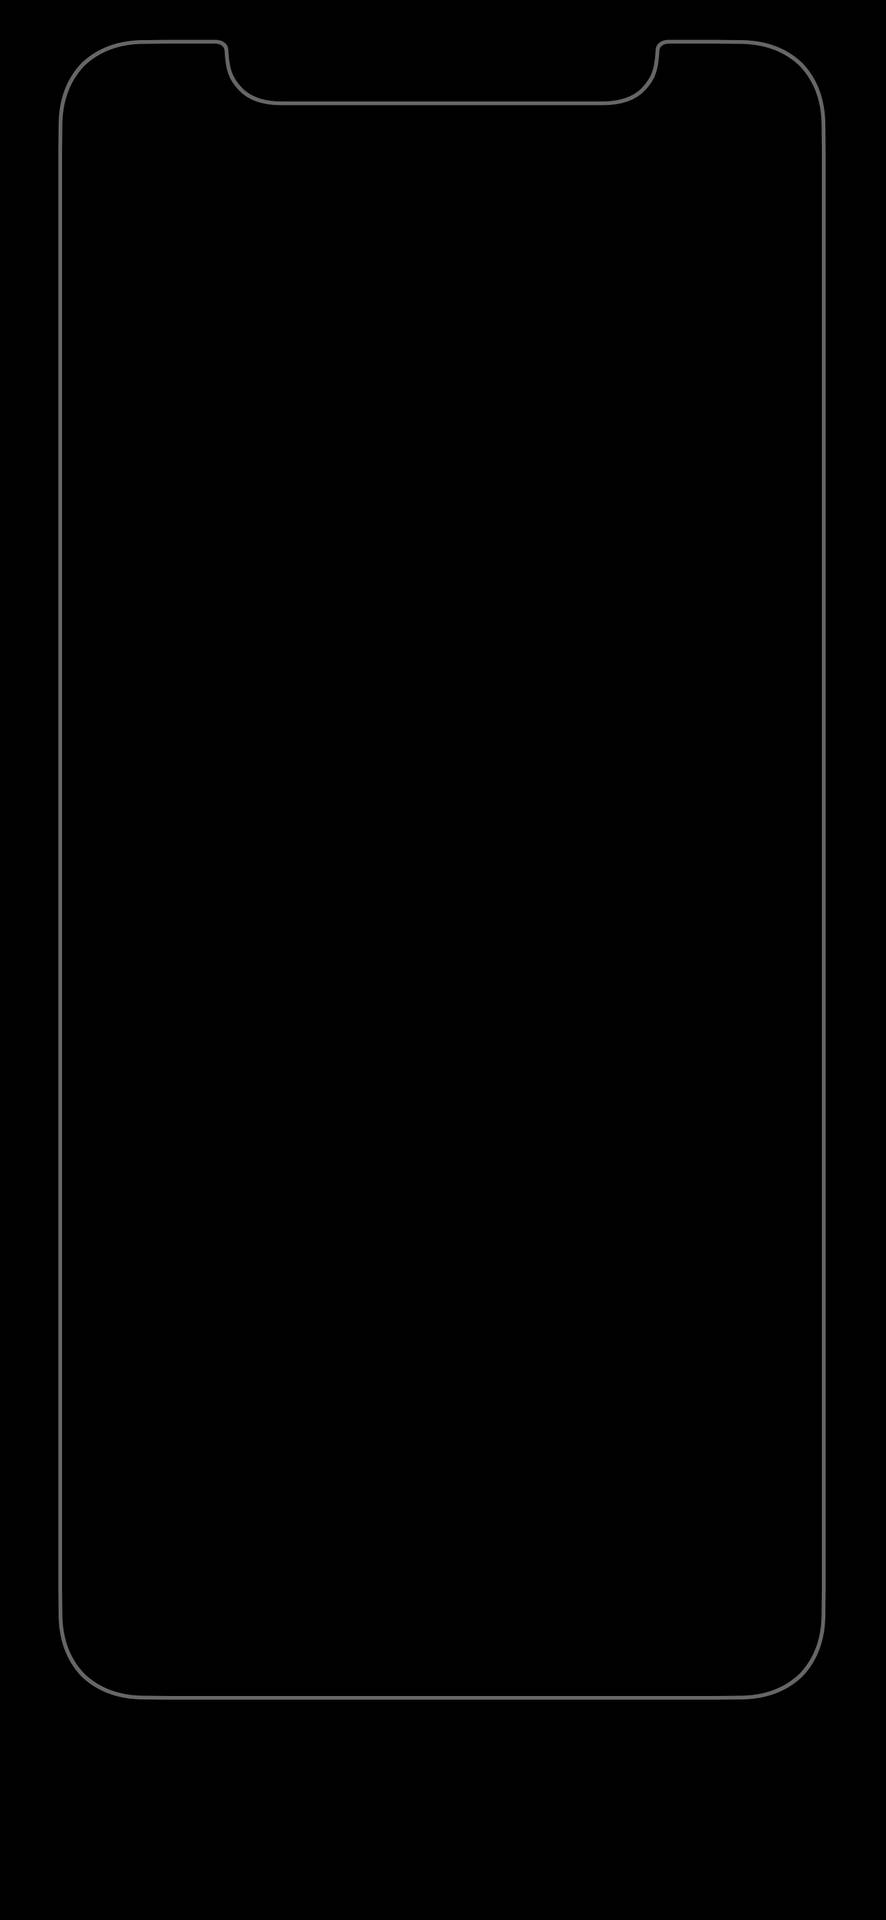 Pure Black With Phone Screen Outline Background